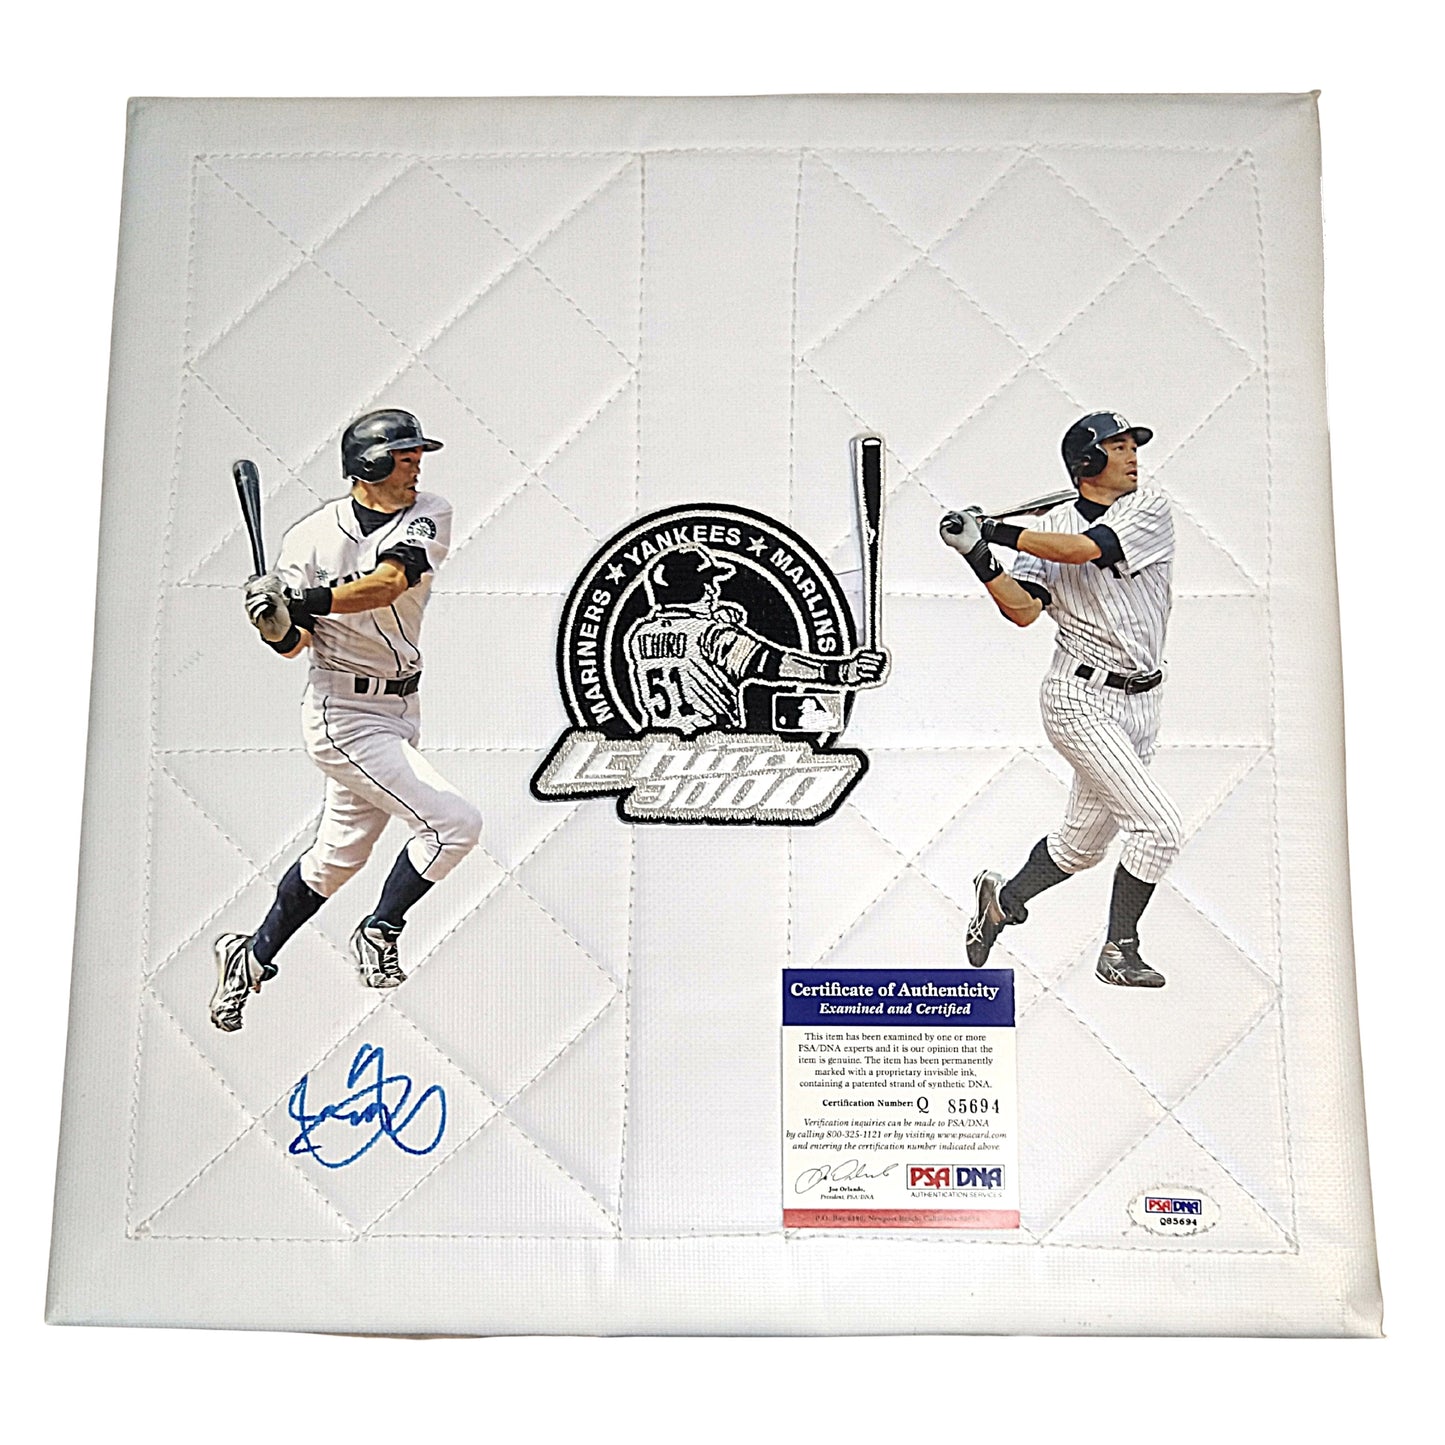 Home Plates- Autographed- Ichiro Suzuki Signed 3000 Career Hits Photo Base- Seattle Mariners- New York Yankees- Miami Marlins- Exact Proof Photo- PSA/DNA Authentication 101